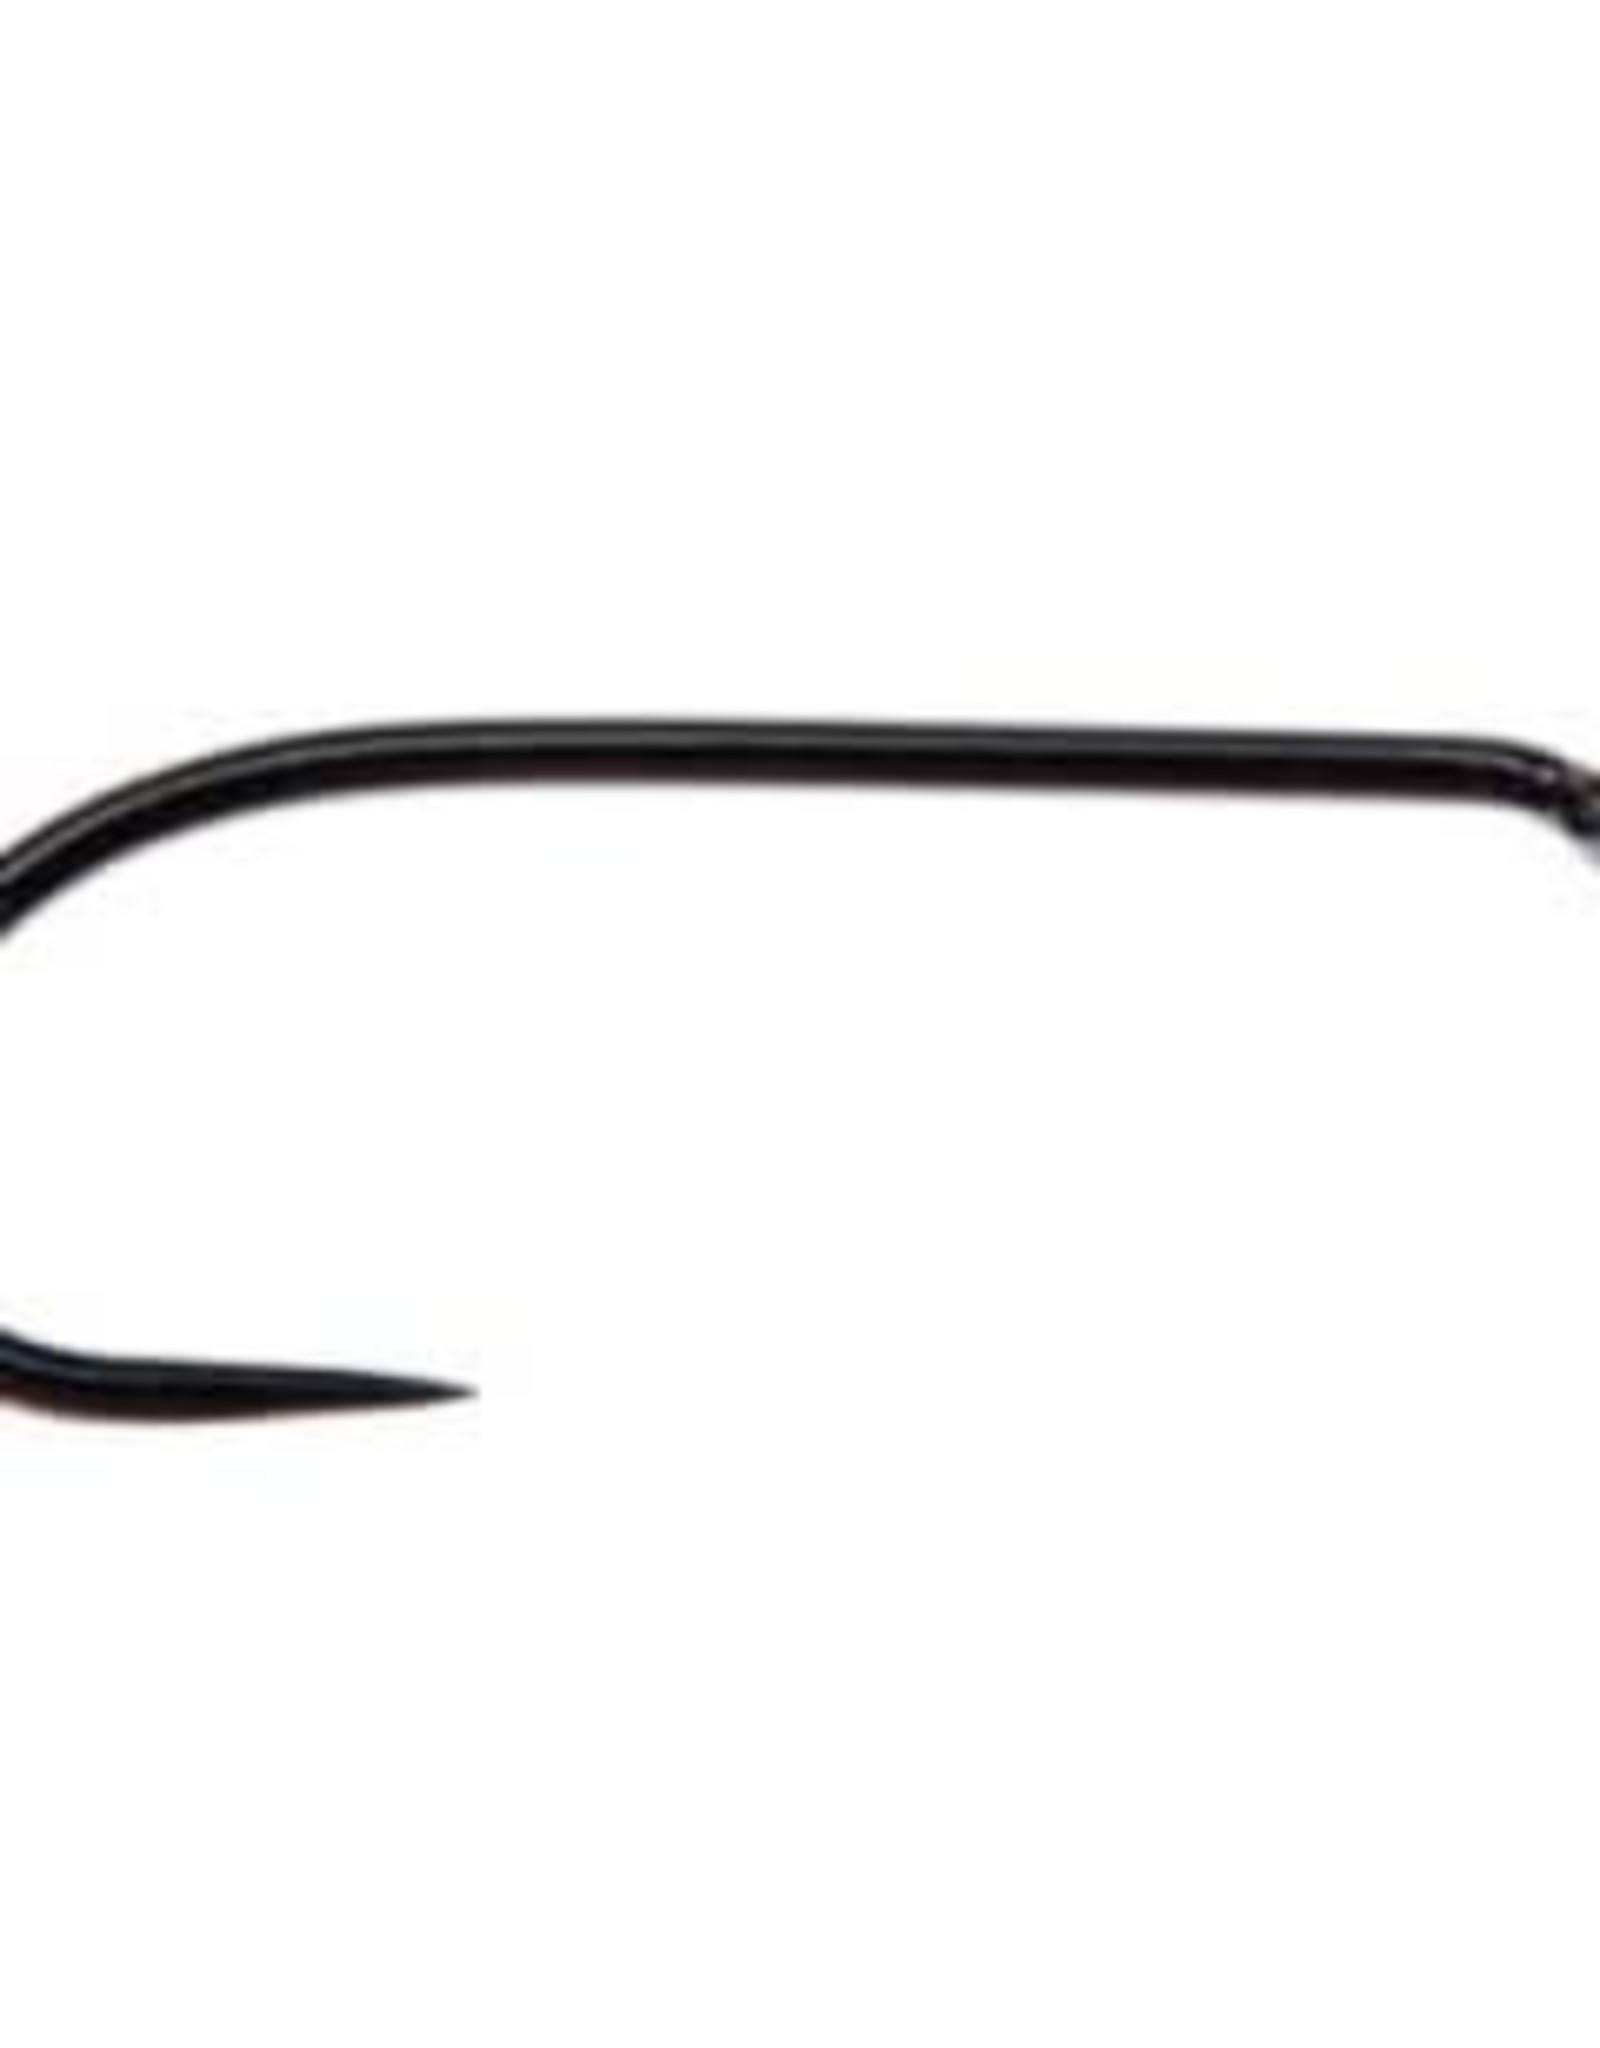 Ahrex Hooks AHREX FW561 #8 Nymph Traditional Barbless